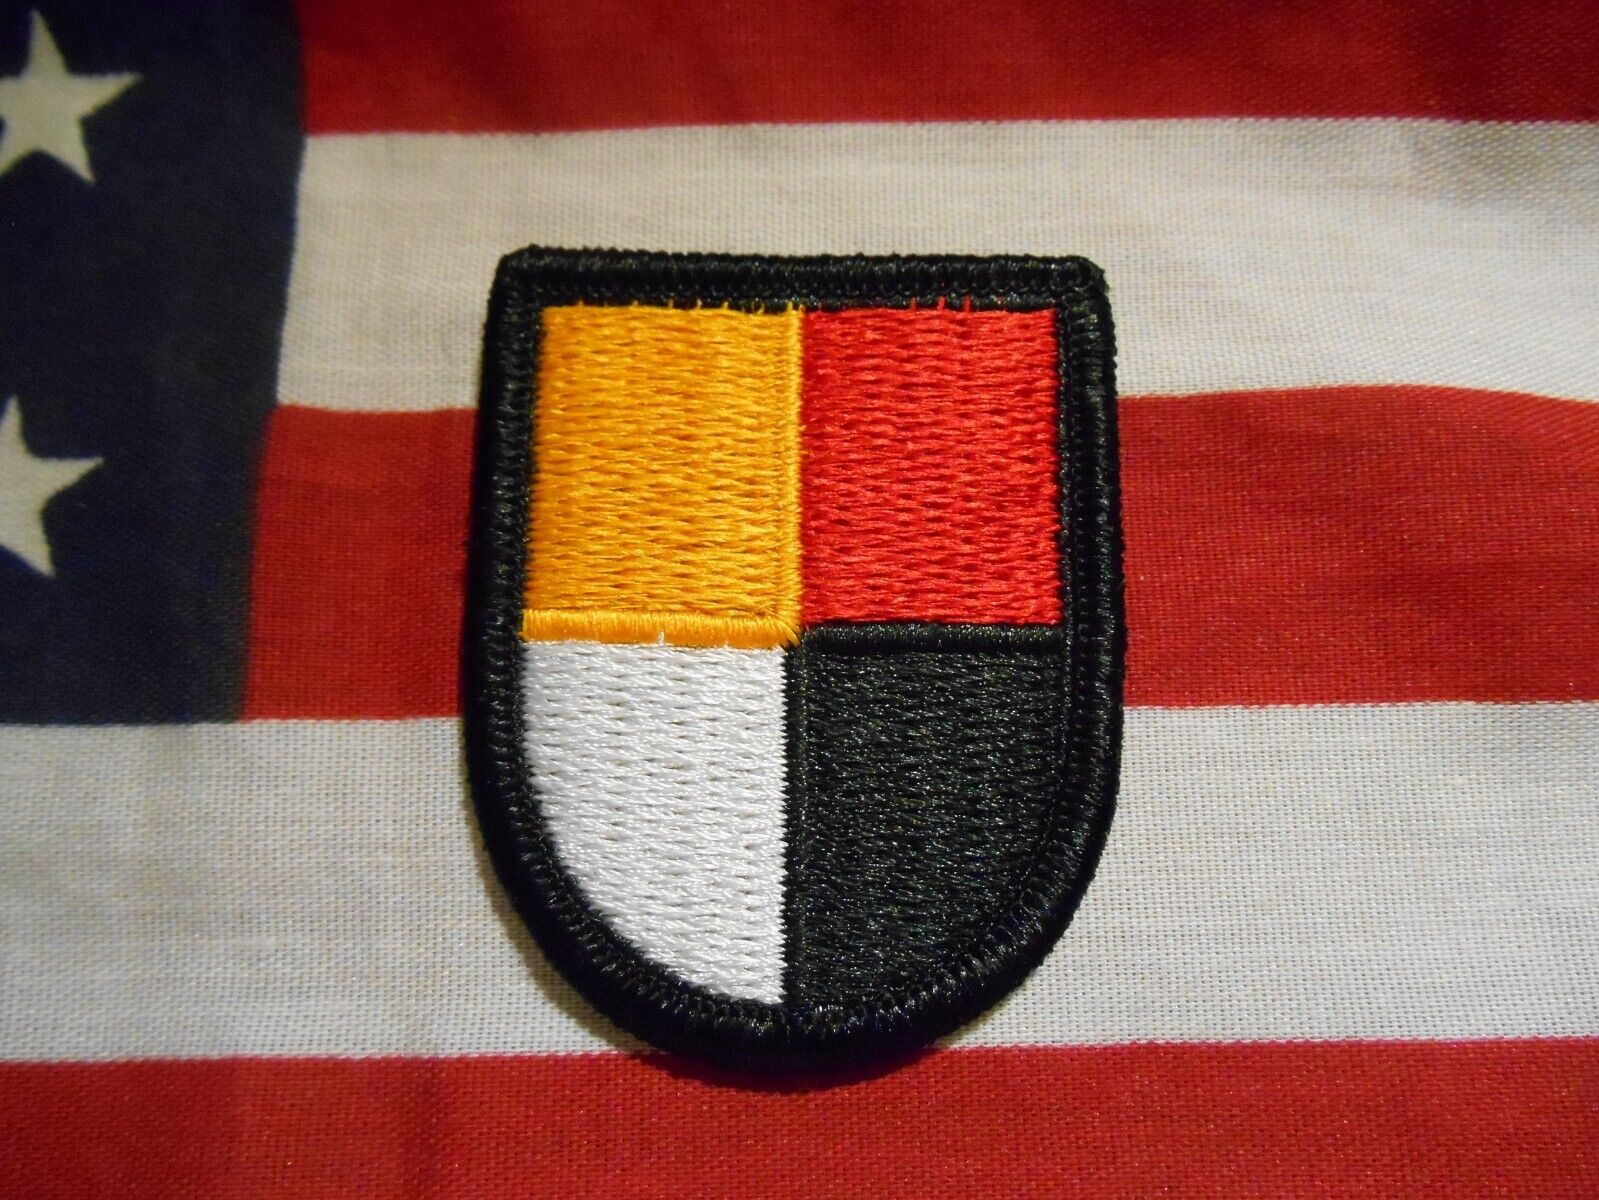 US ARMY 3rd SPECIAL FORCES GROUP BERET FLASH M/E